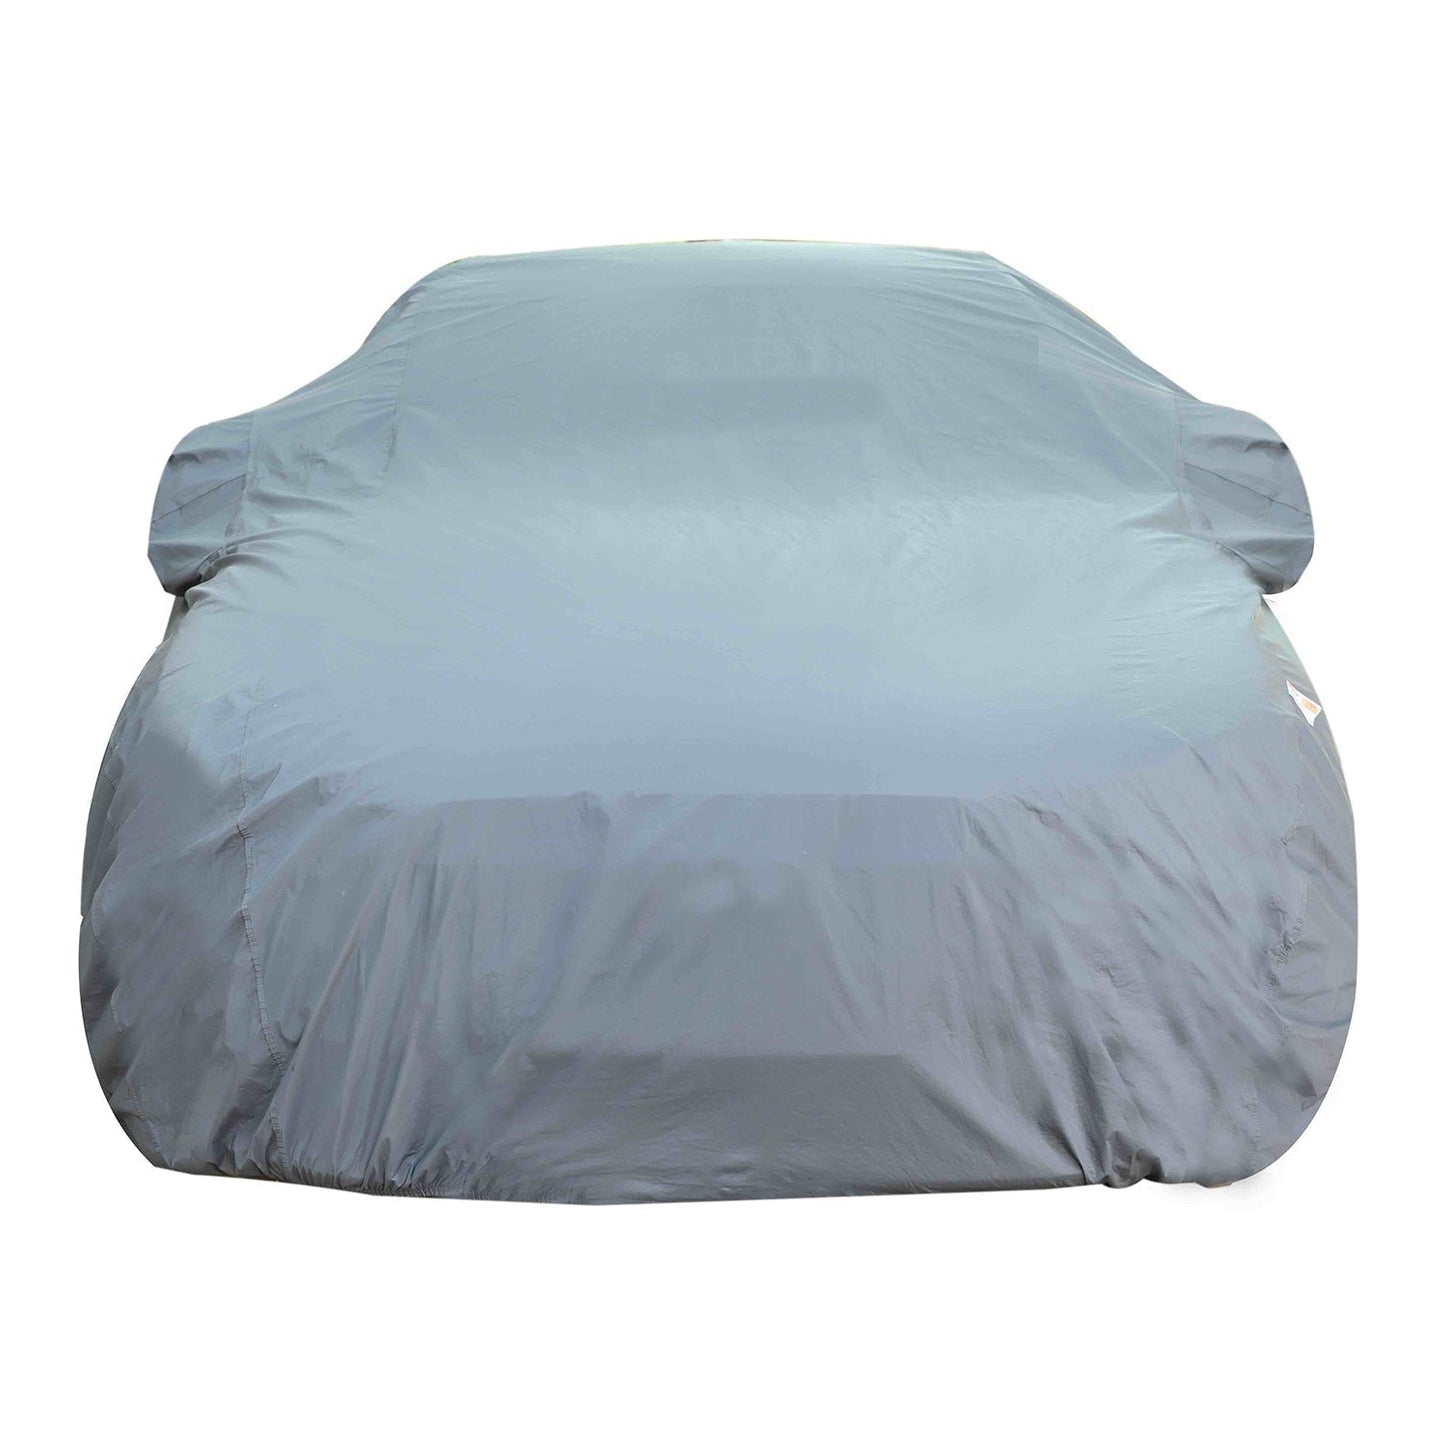 Oshotto Dark Grey 100% Anti Reflective, dustproof and Water Proof Car Body Cover with Mirror Pockets For Toyota Land Cruiser Prado